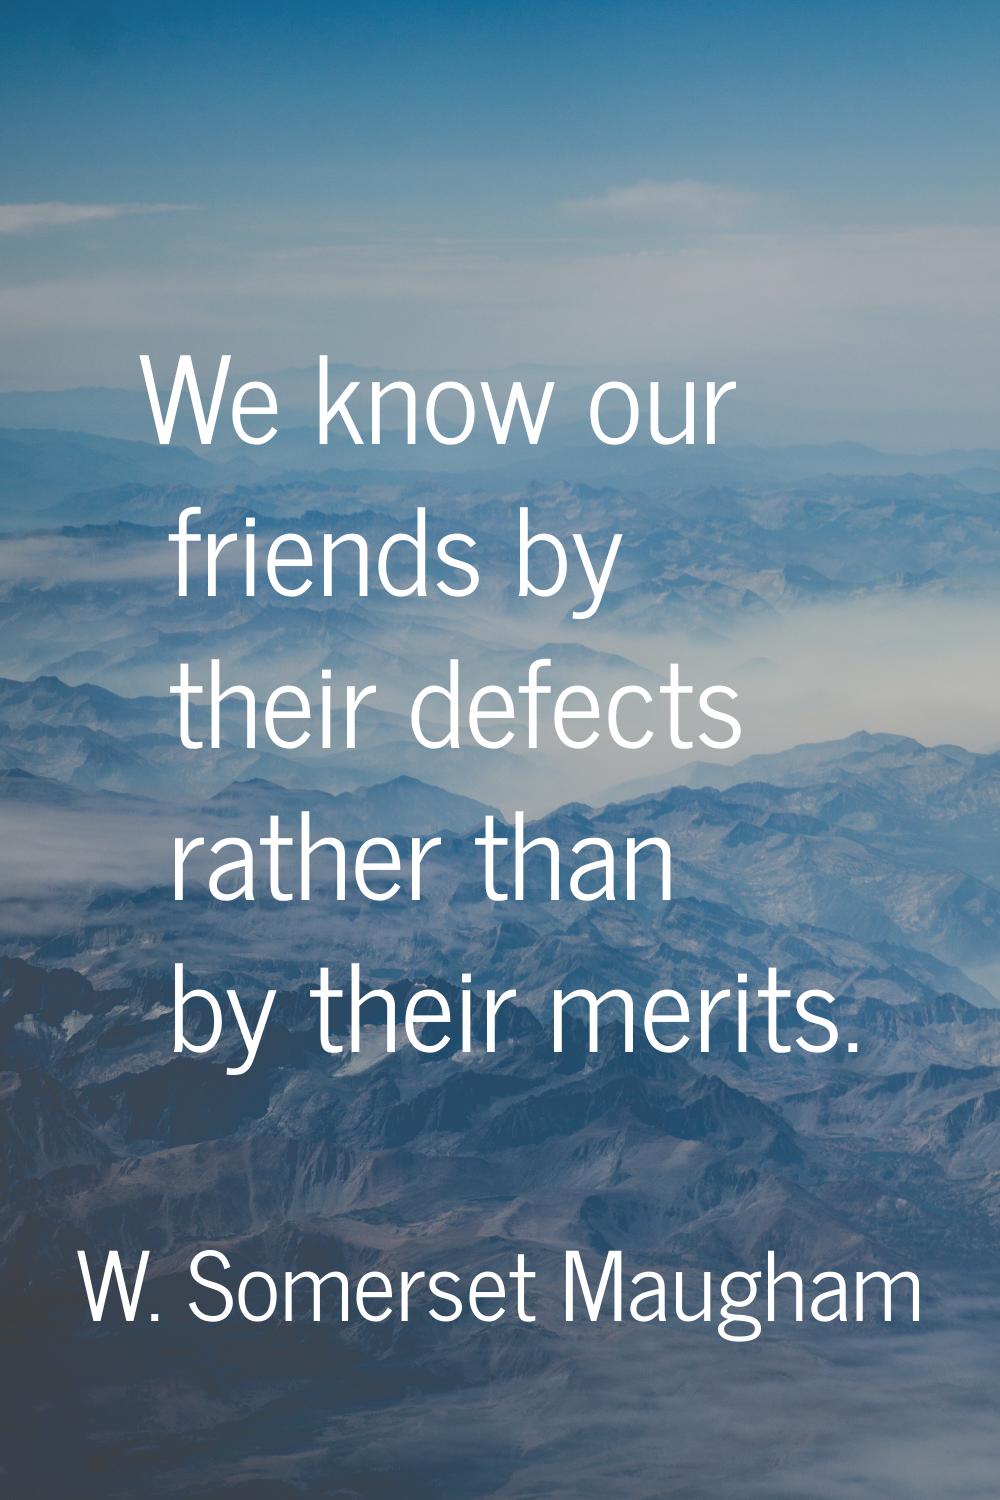 We know our friends by their defects rather than by their merits.